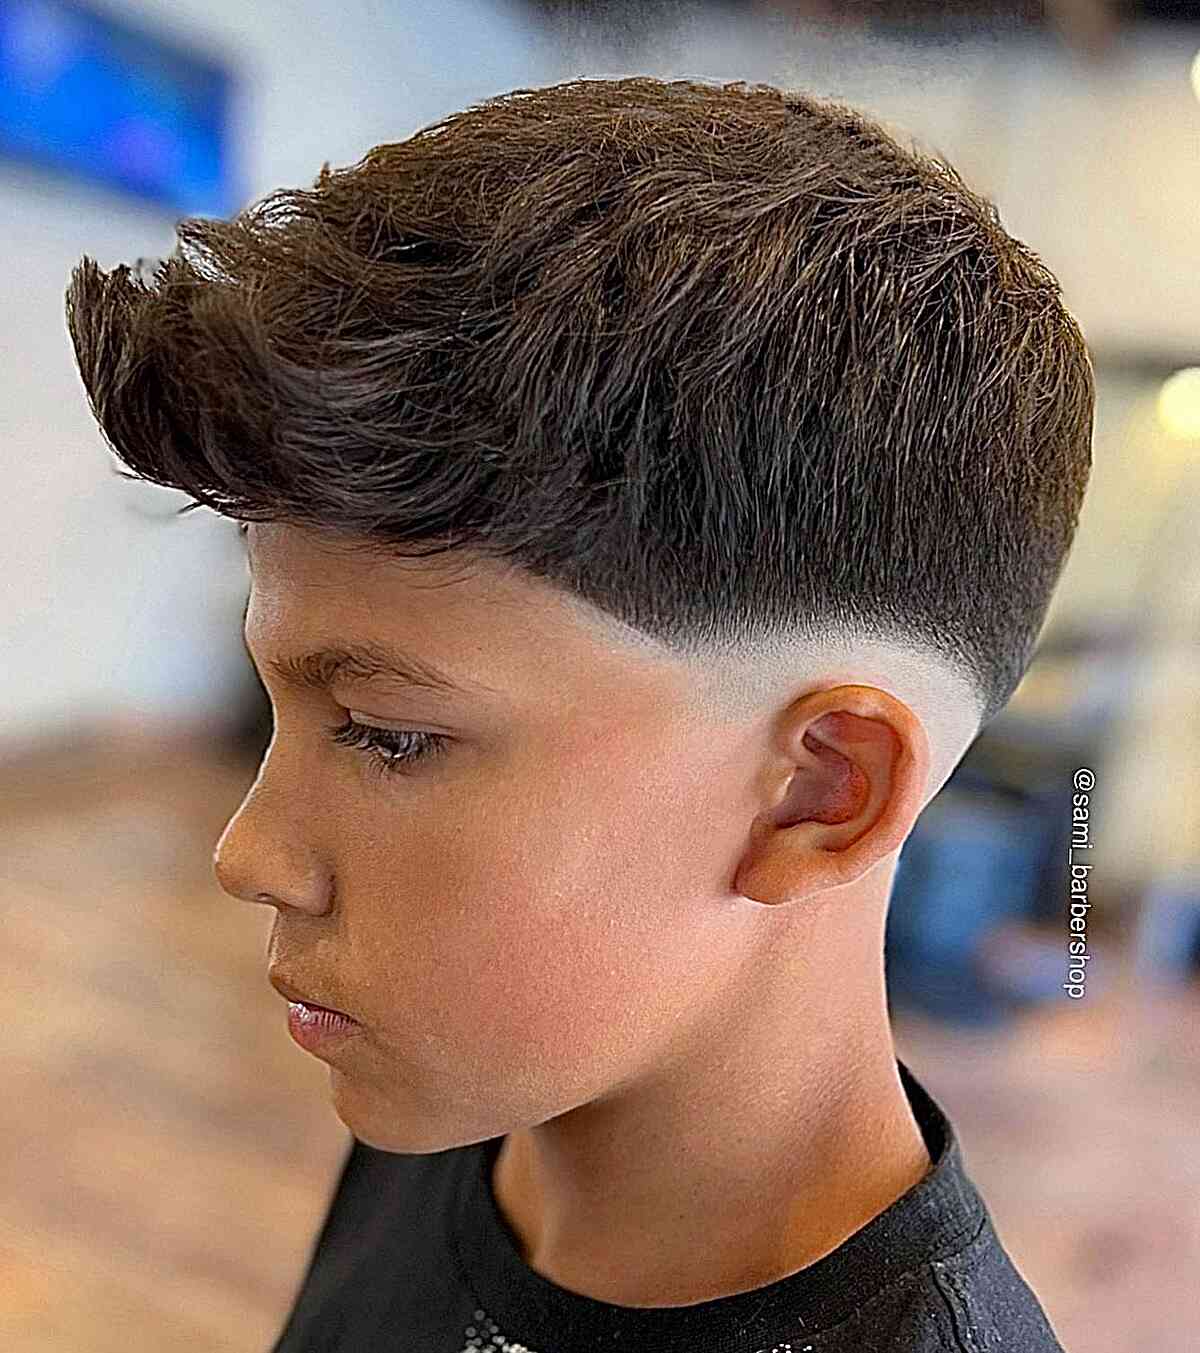 Adorable Short Cut with a Quiff for Boys